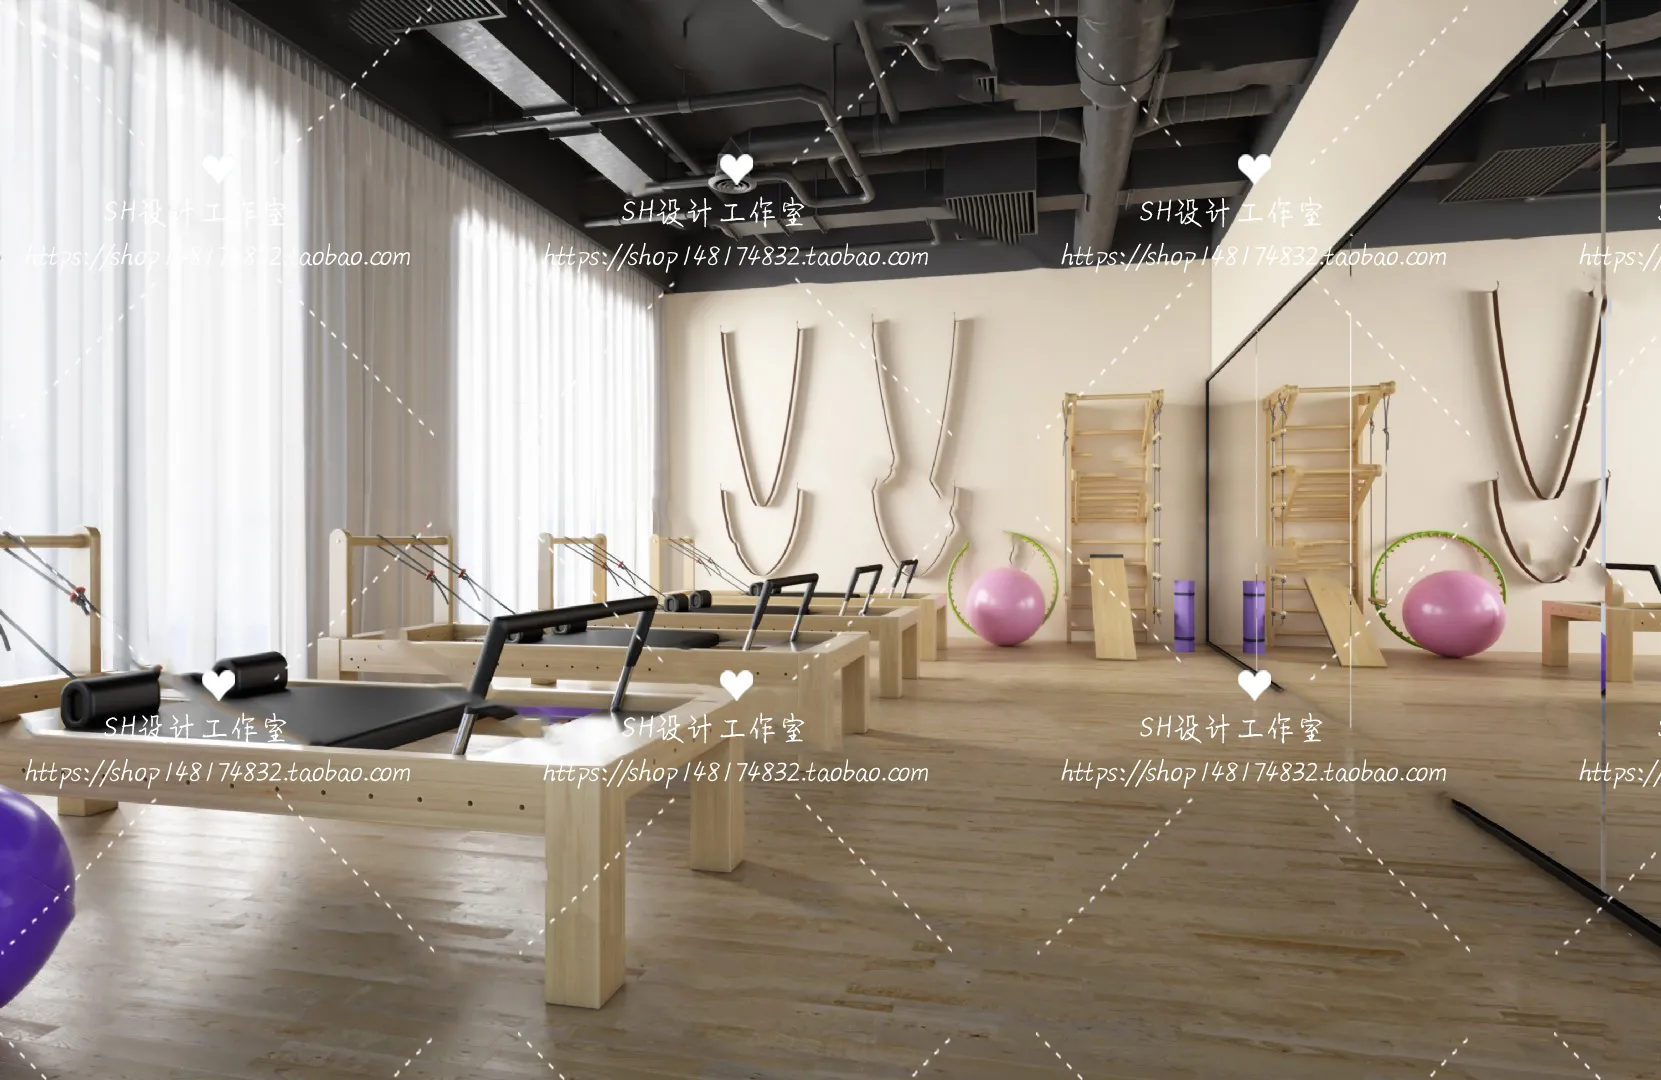 GYM AND YOGA 3D SCENES – VRAY RENDER – 042